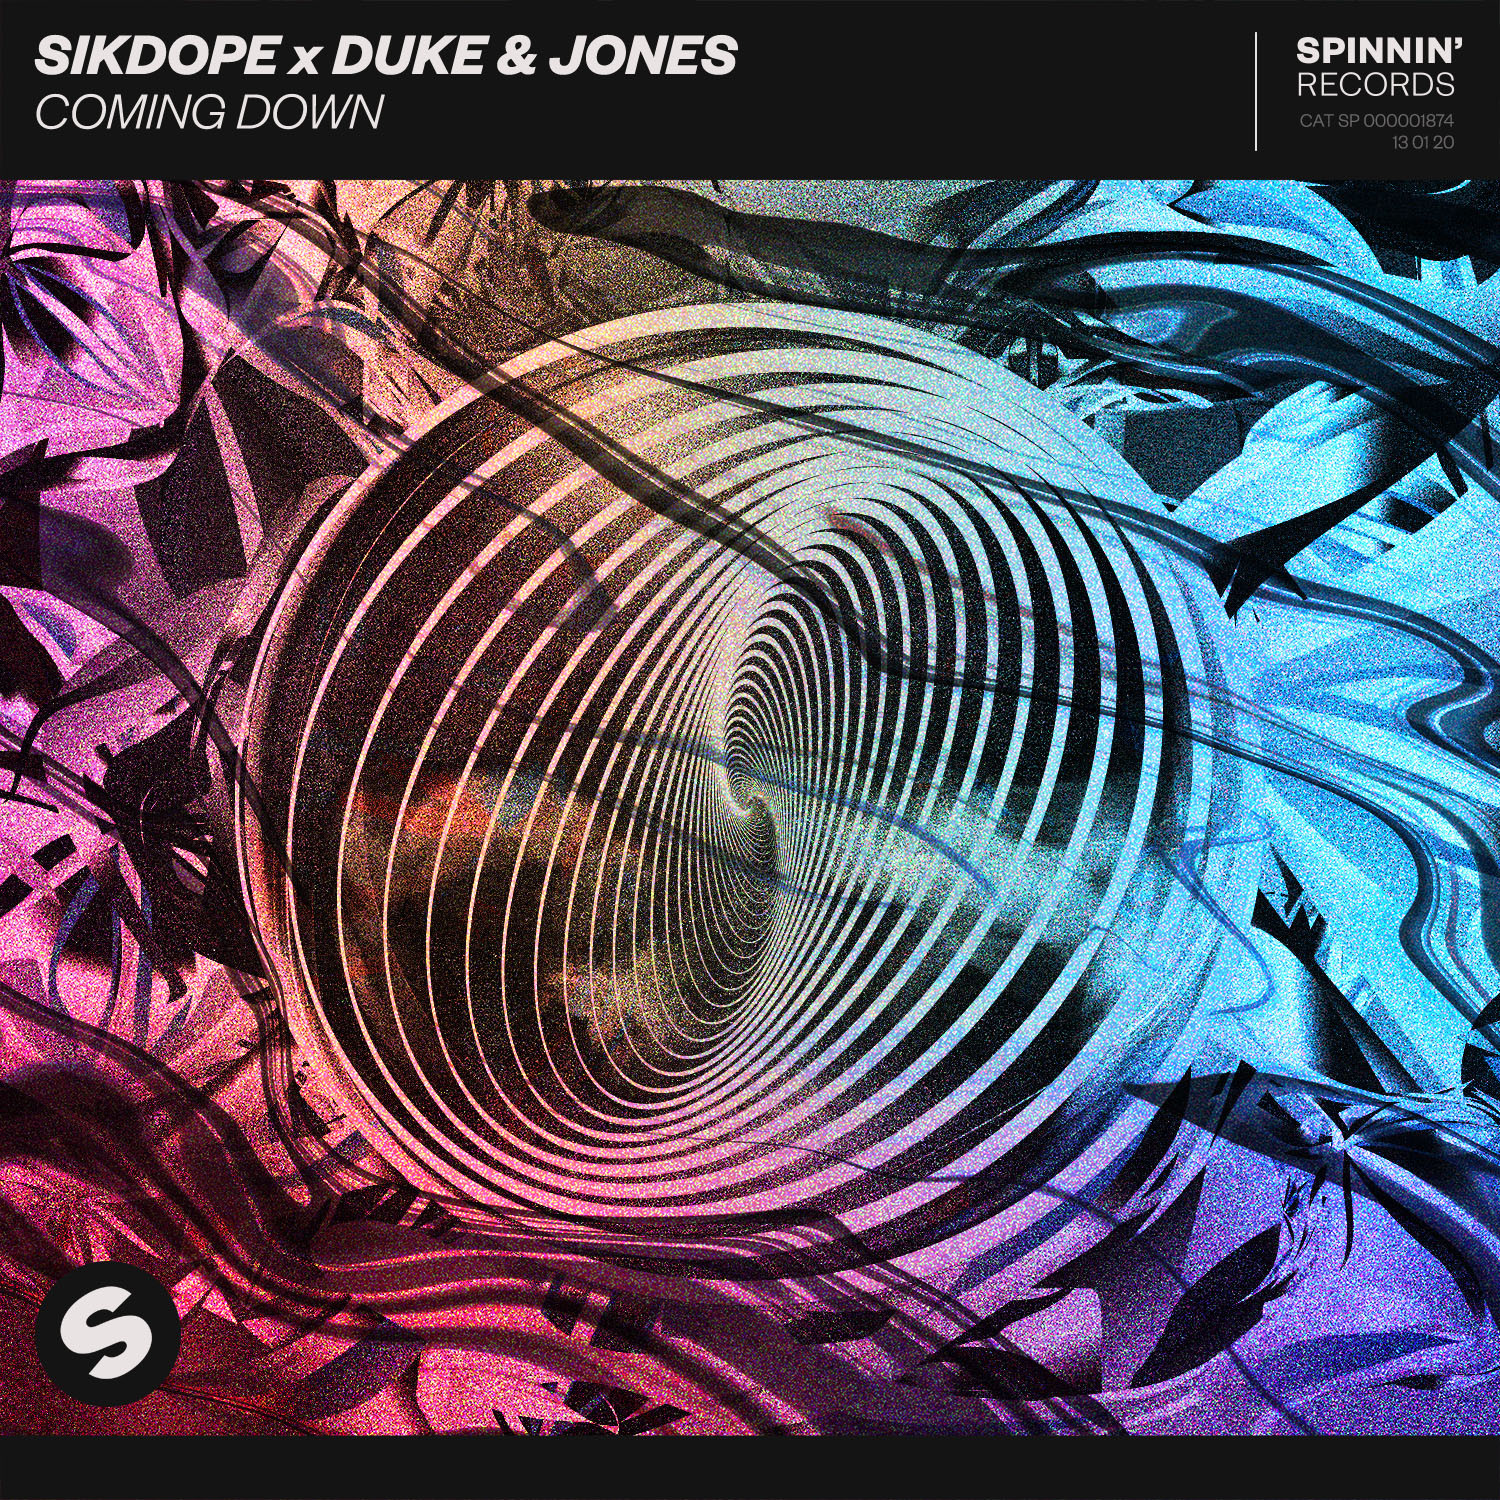 Sikdope X Duke Jones Coming Down Free Download Spinnin Records Spinnin Records High quality spinnin records gifts and merchandise. sikdope x duke jones coming down